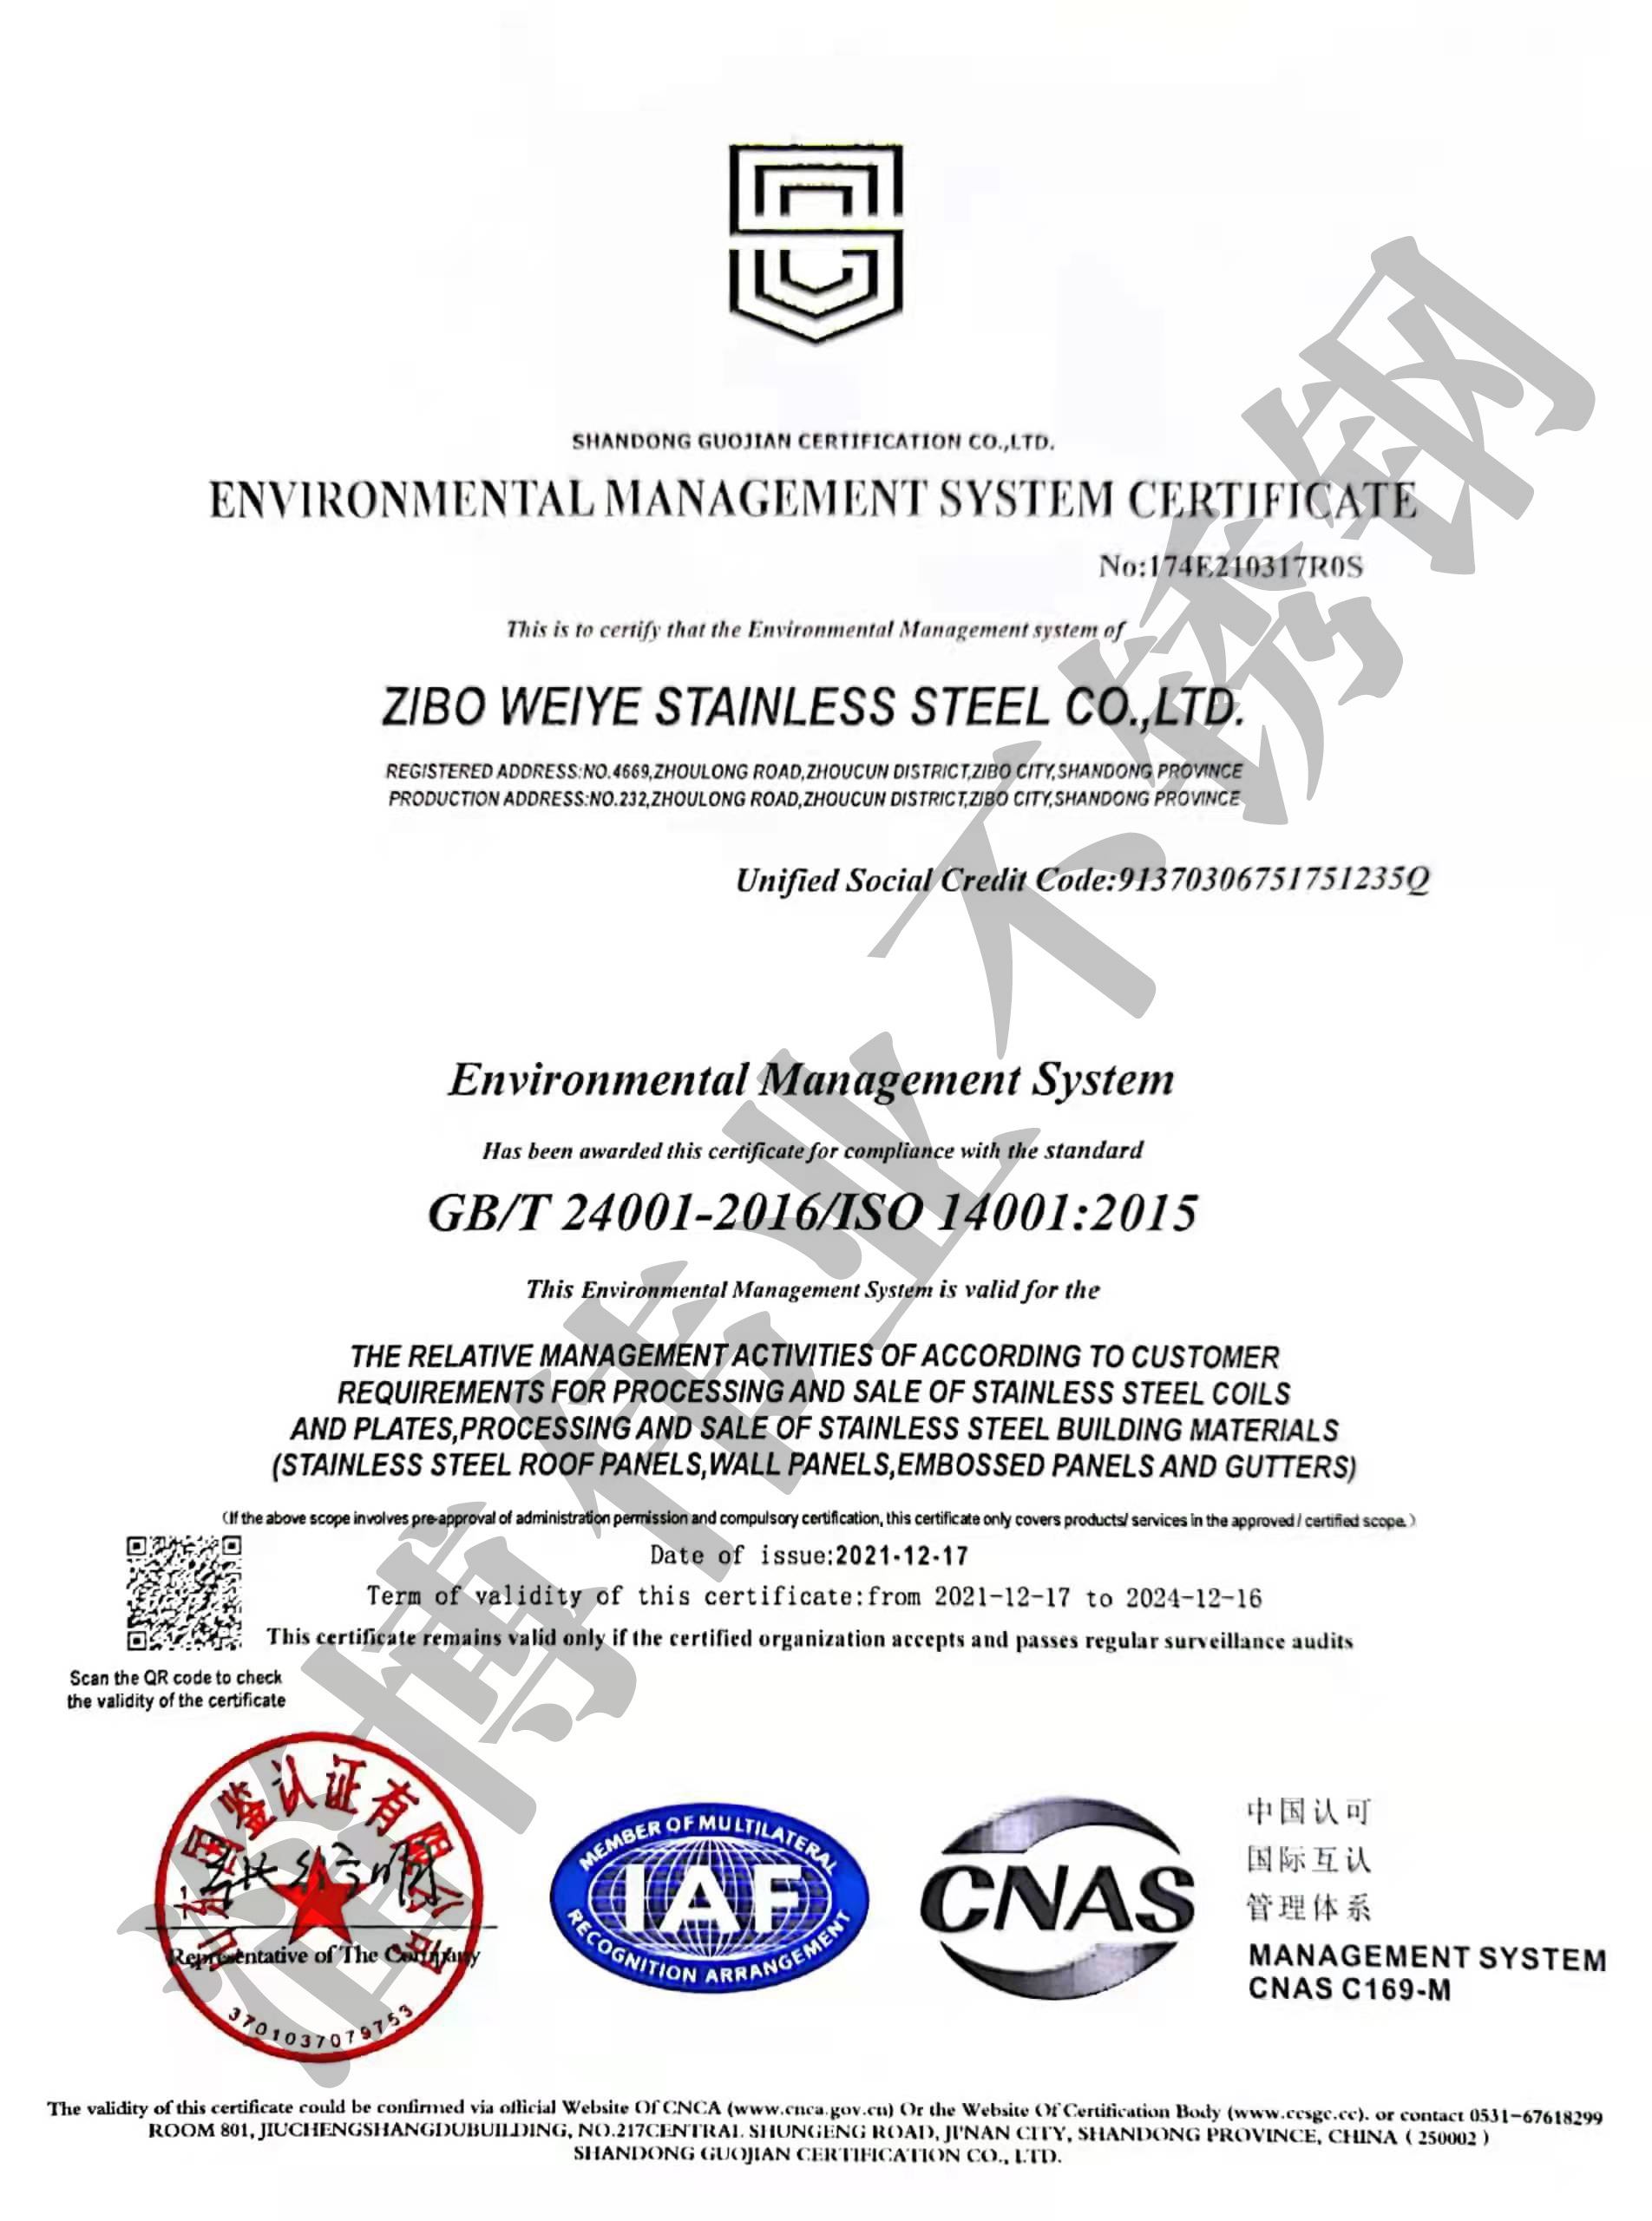 ENVIRONMIENTAL MANAGEMENT SYSTEM CERTIFICATE